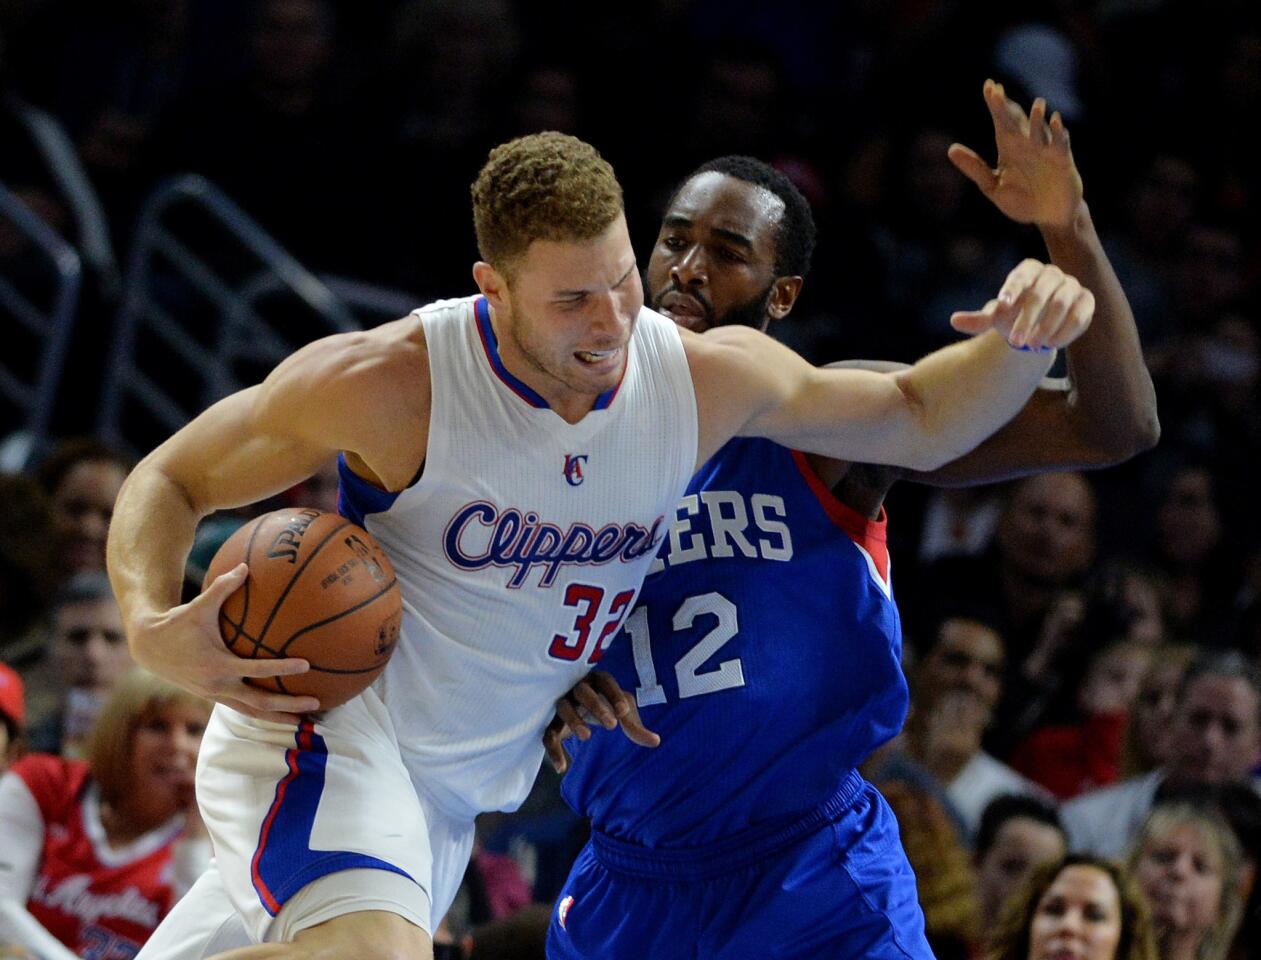 Clippers forward Blake Griffin tries to drive past 76ers forward Luc Richard Mbah a Moute in the second half.